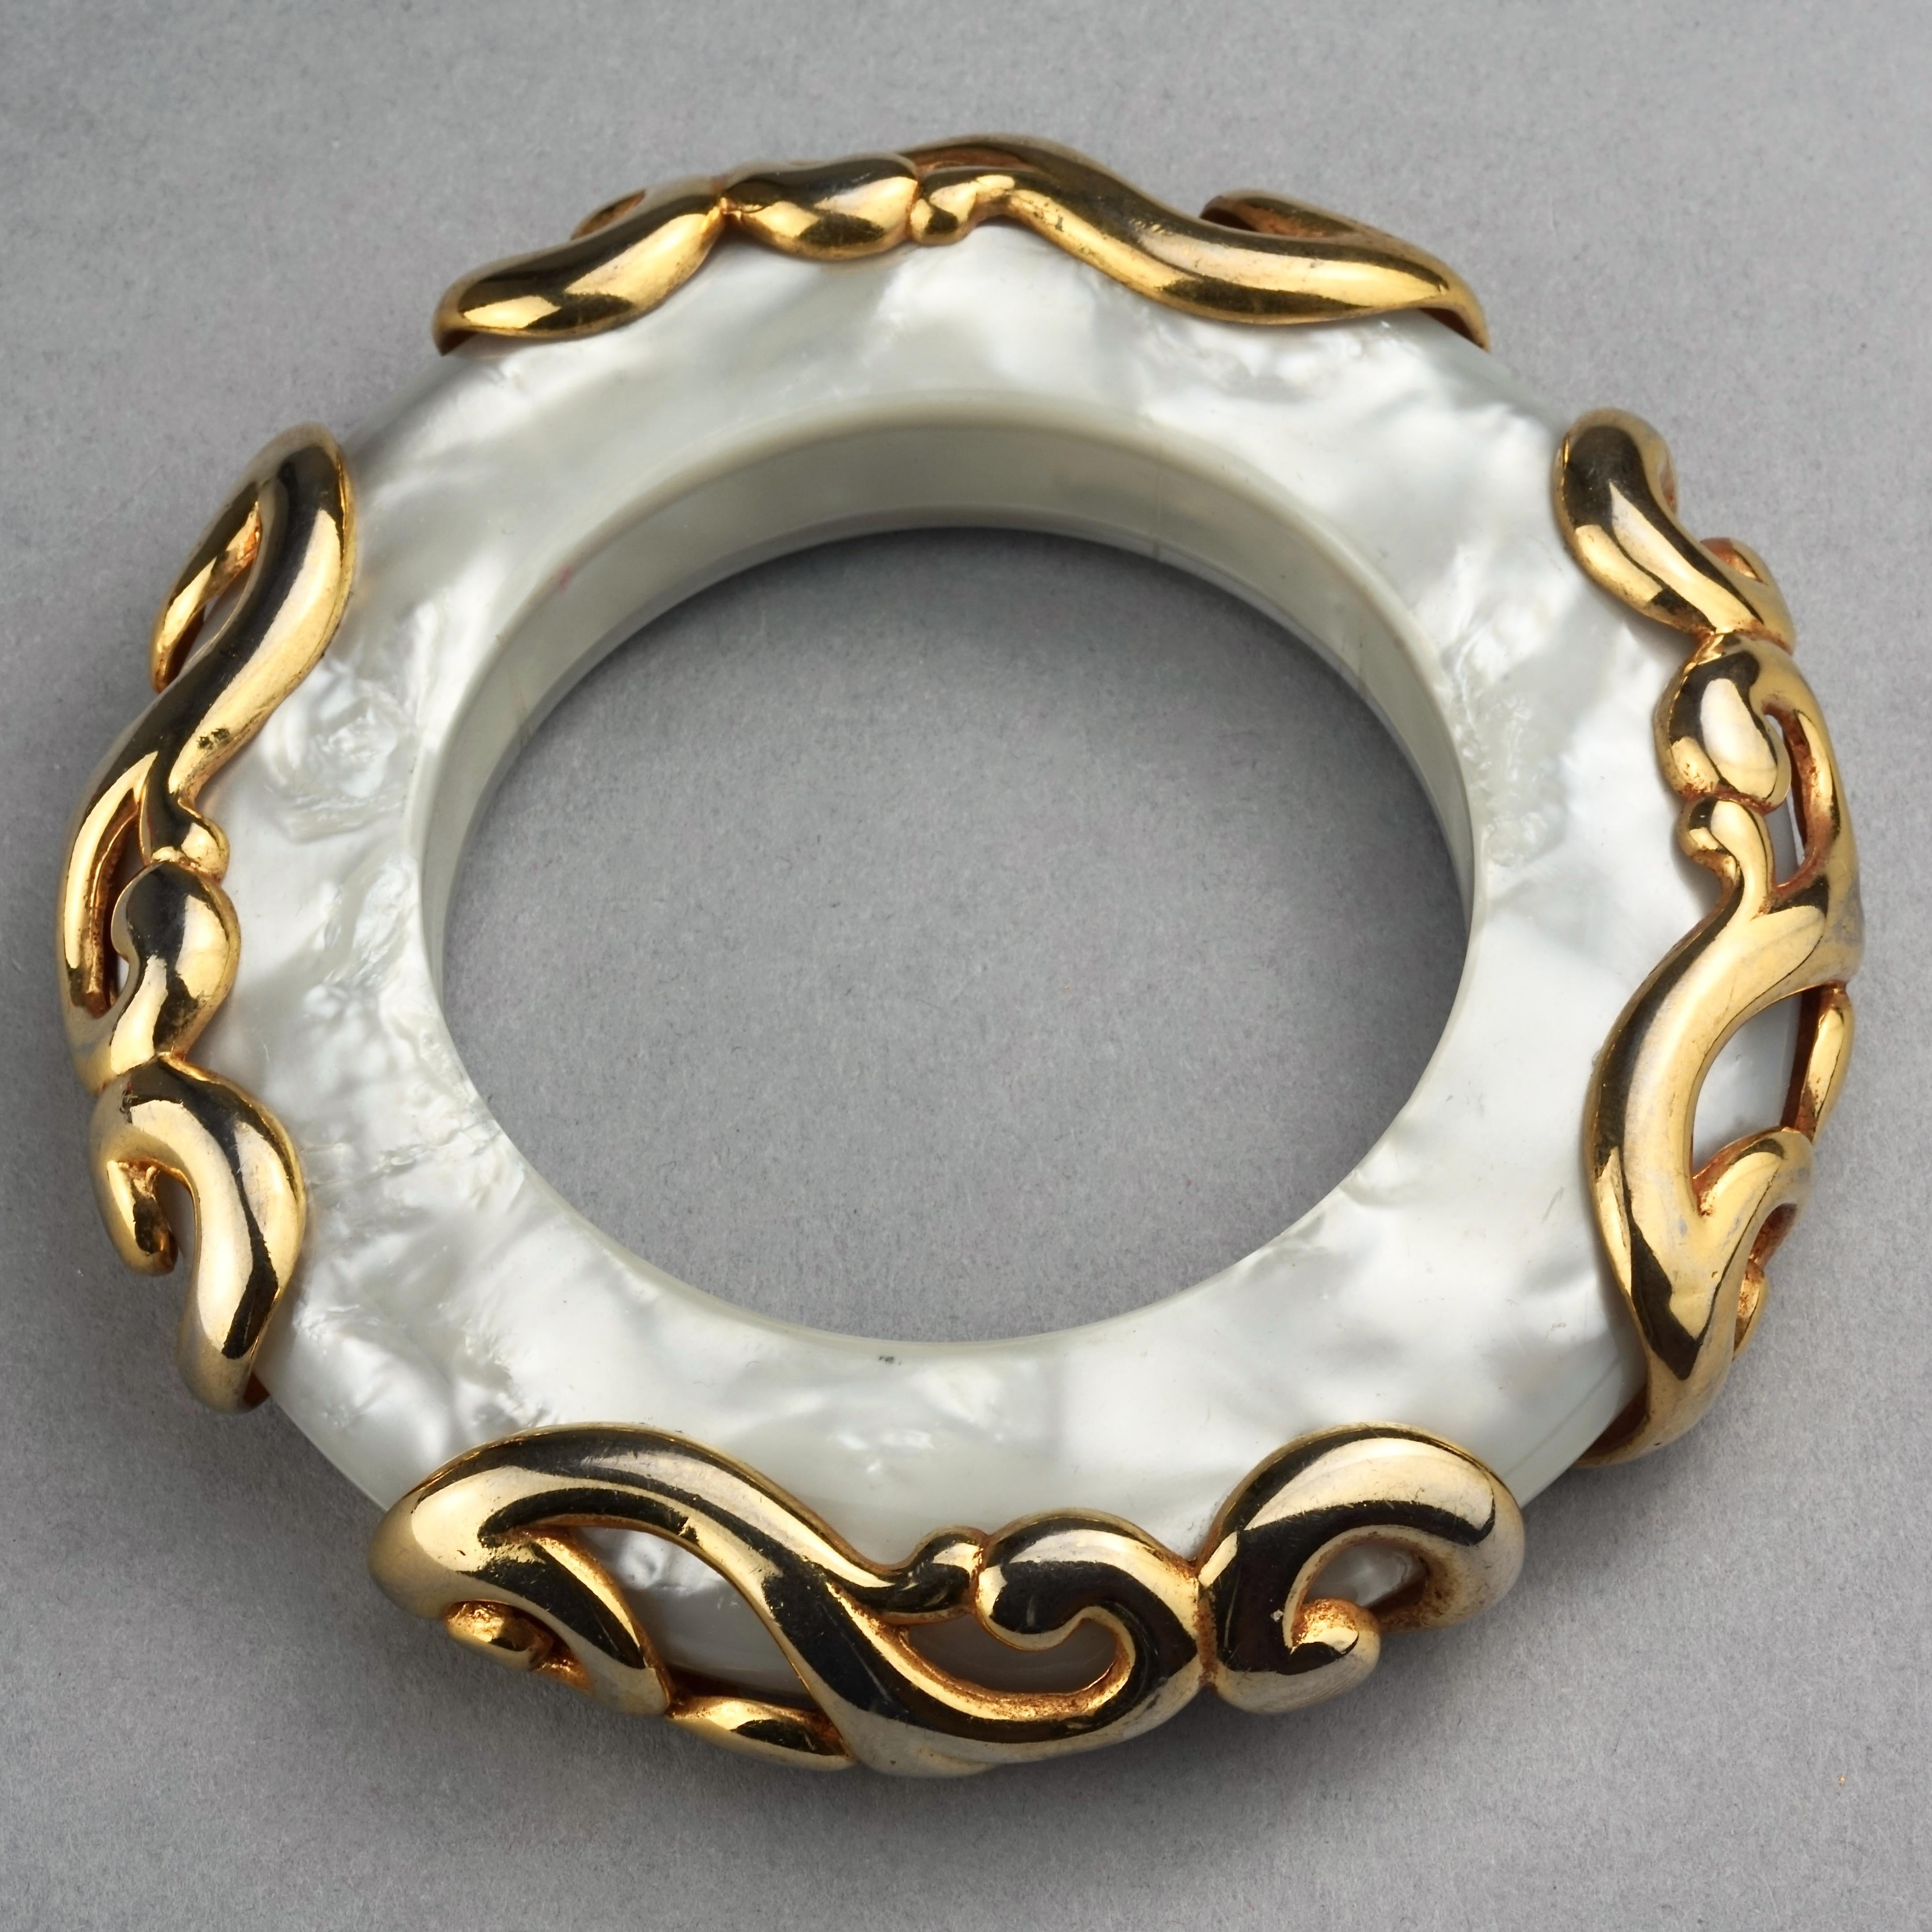 Vintage DOMINIQUE AURIENTIS Gilt Swirl Mother of Pearl Resin Bangle Bracelet In Good Condition For Sale In Kingersheim, Alsace